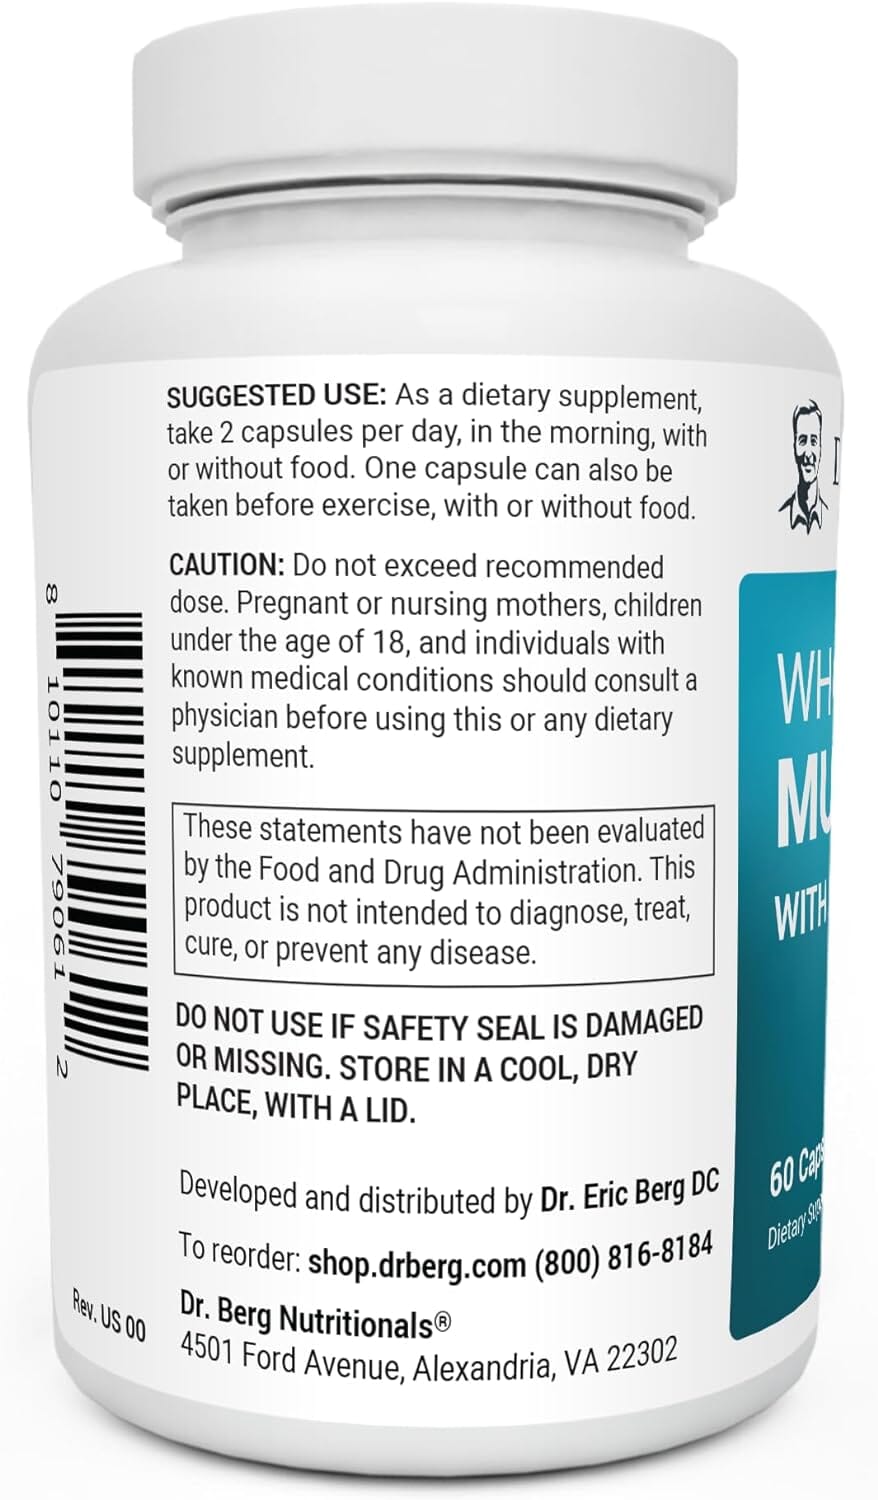 Dr. Berg Whole Food Multivitamin with Minerals - Daily Multivitamin for Men and Women - Includes Premium Whole Food Fruits and Vegetable Blend with Folate, Alpha-lipoic Acid and More - 60 Capsules